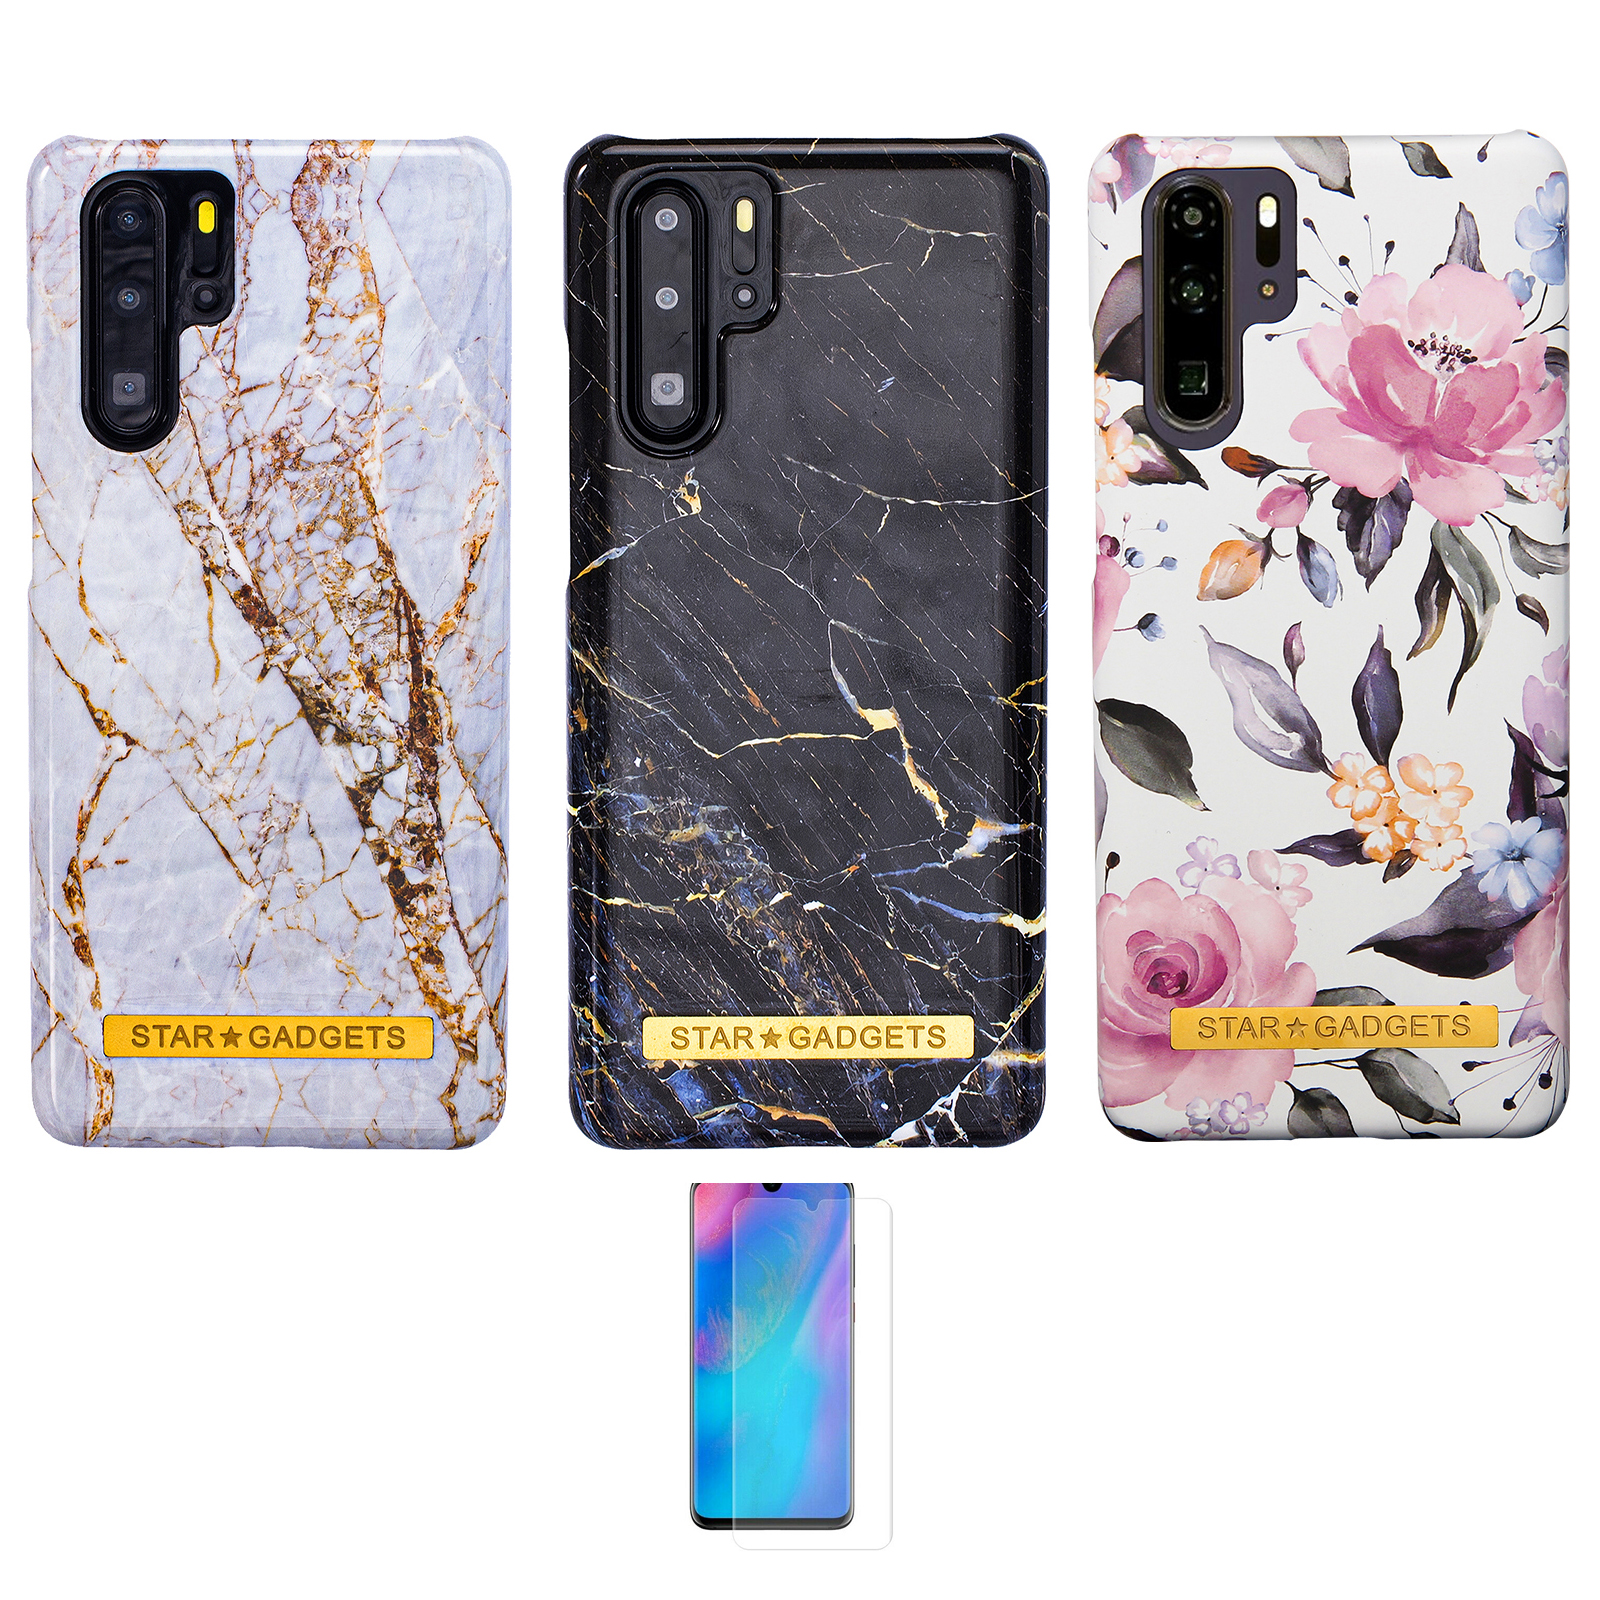 Huawei P30 Pro - Case Protection Flowers / Marble